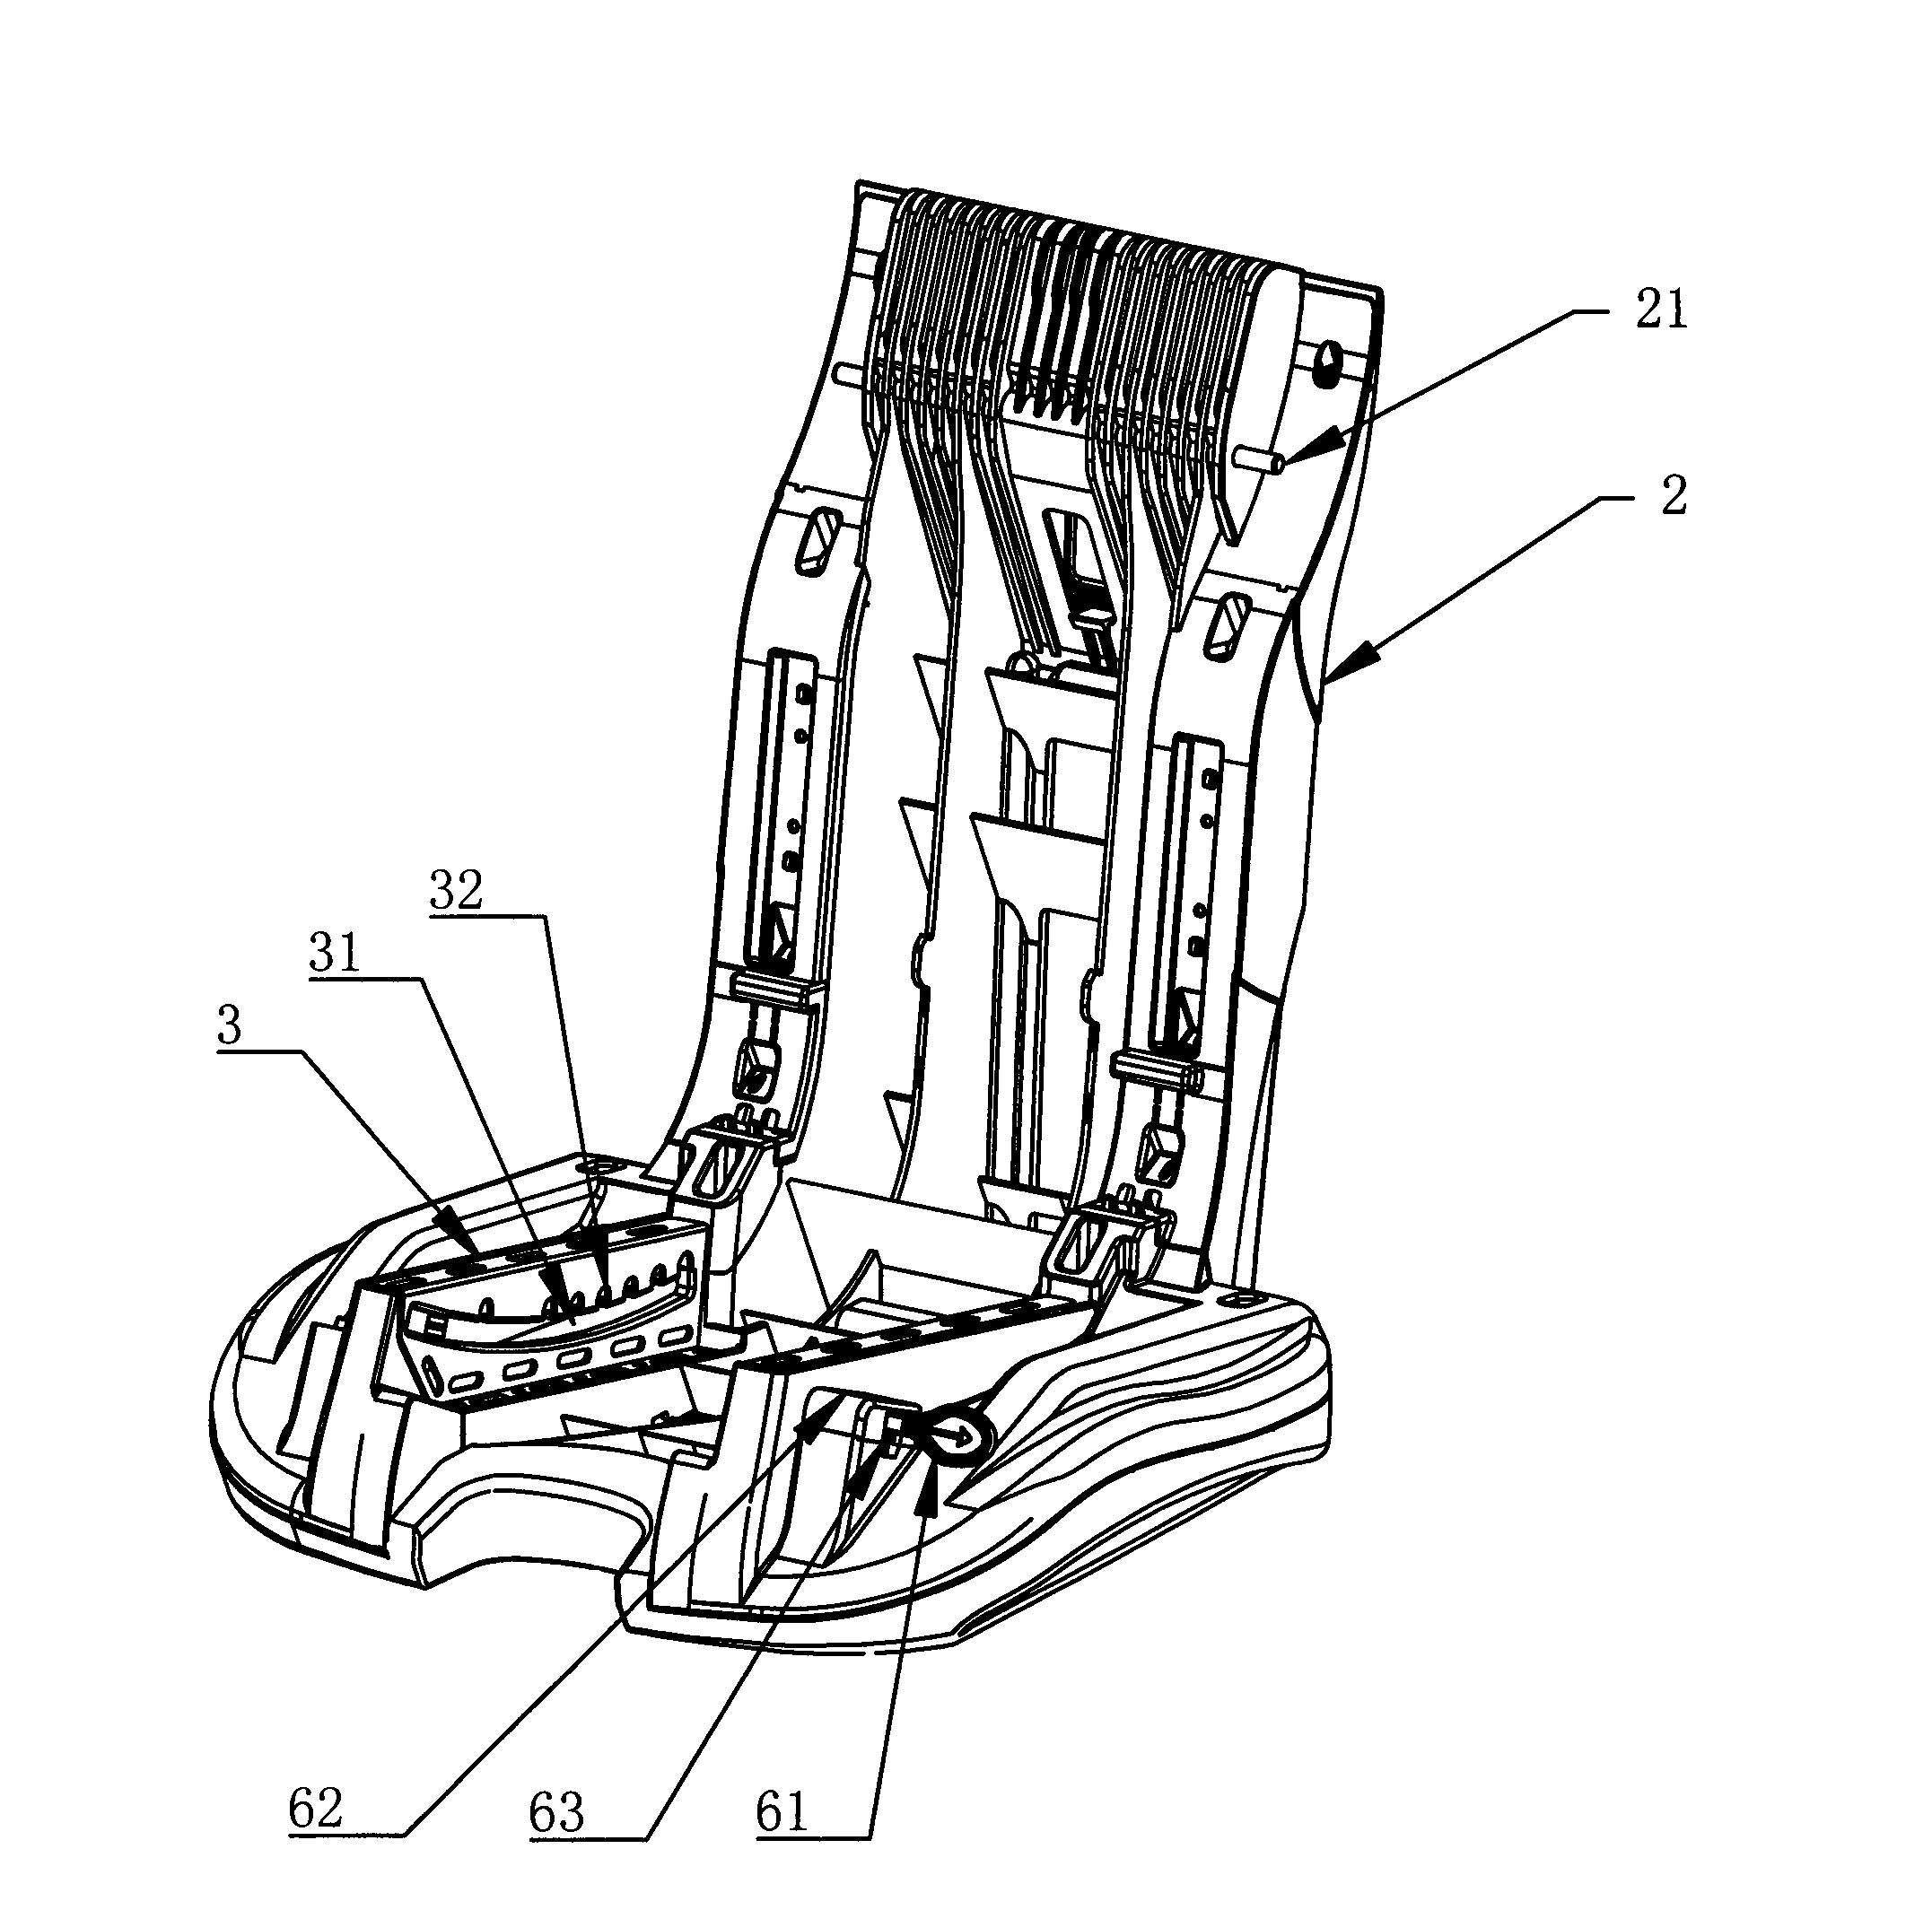 Connecting structure of safety chair for children